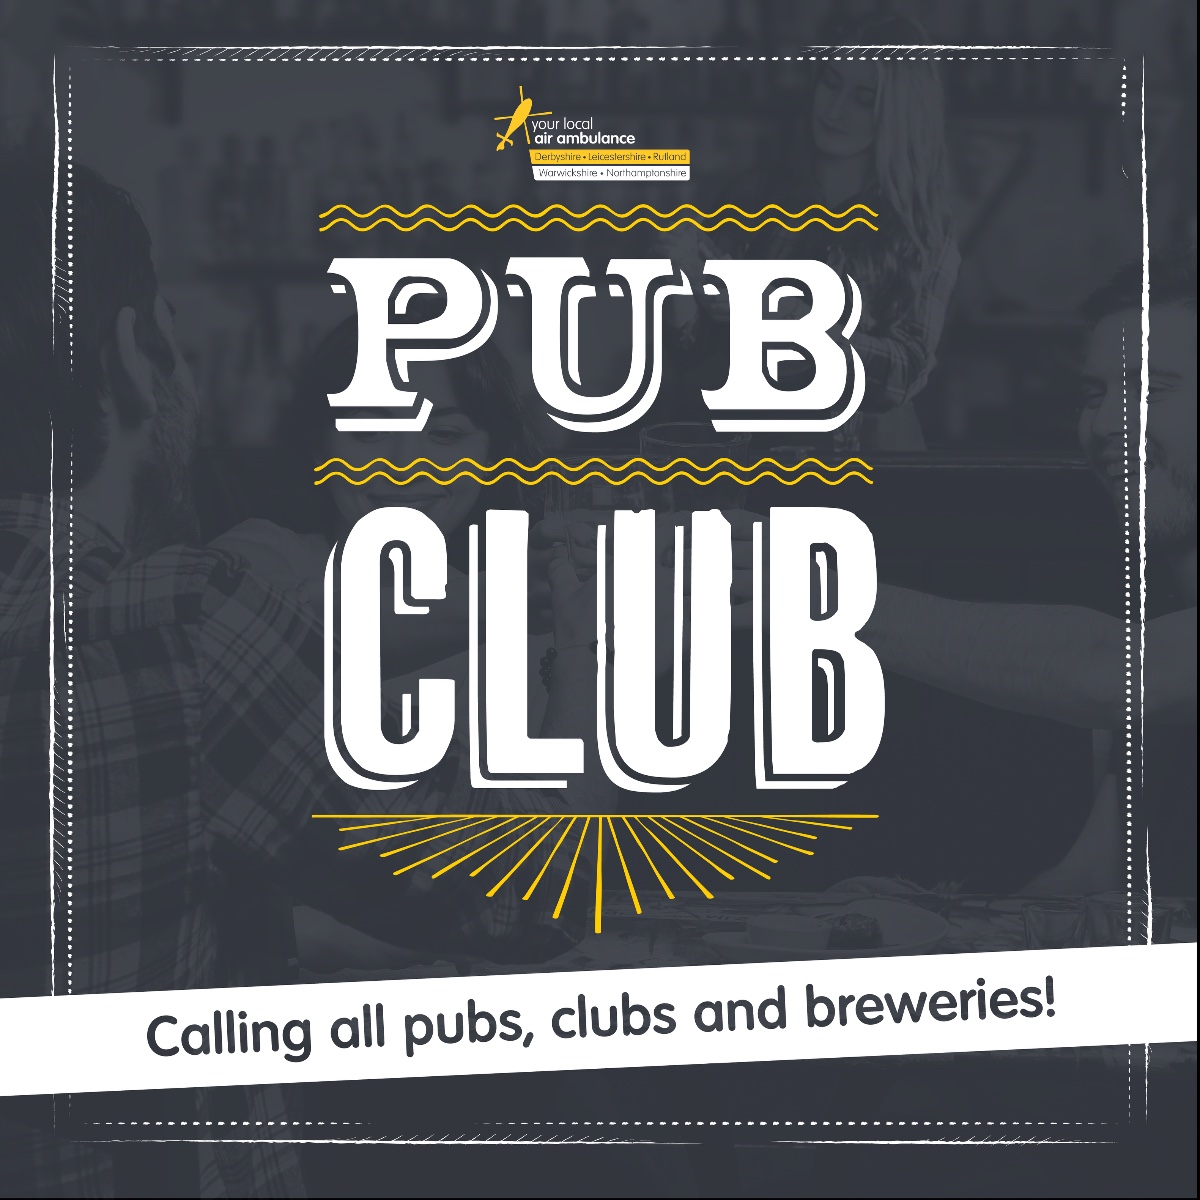 Are you a landlord, brewery or a regular visitor to your local pub? Why not get involved in rallying your community to fundraise for The Air Ambulance Service by joining our Pub Club.

More information: bit.ly/3CTBGsQ
#pubclub #charity #airambulance